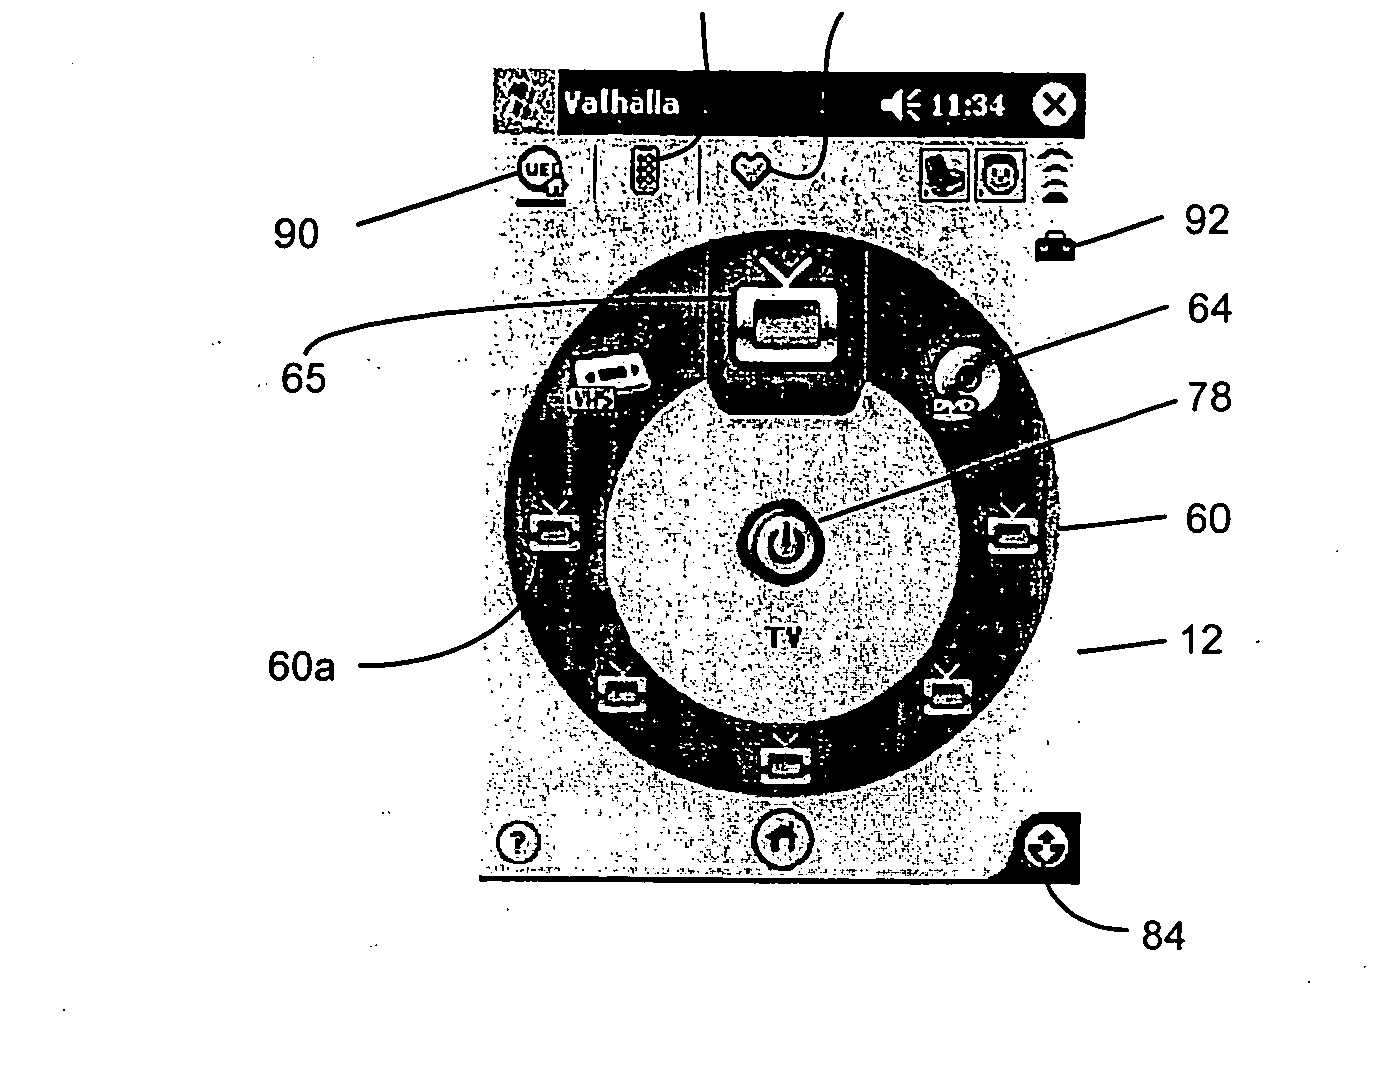 Hand held remote control device having an improved user interface